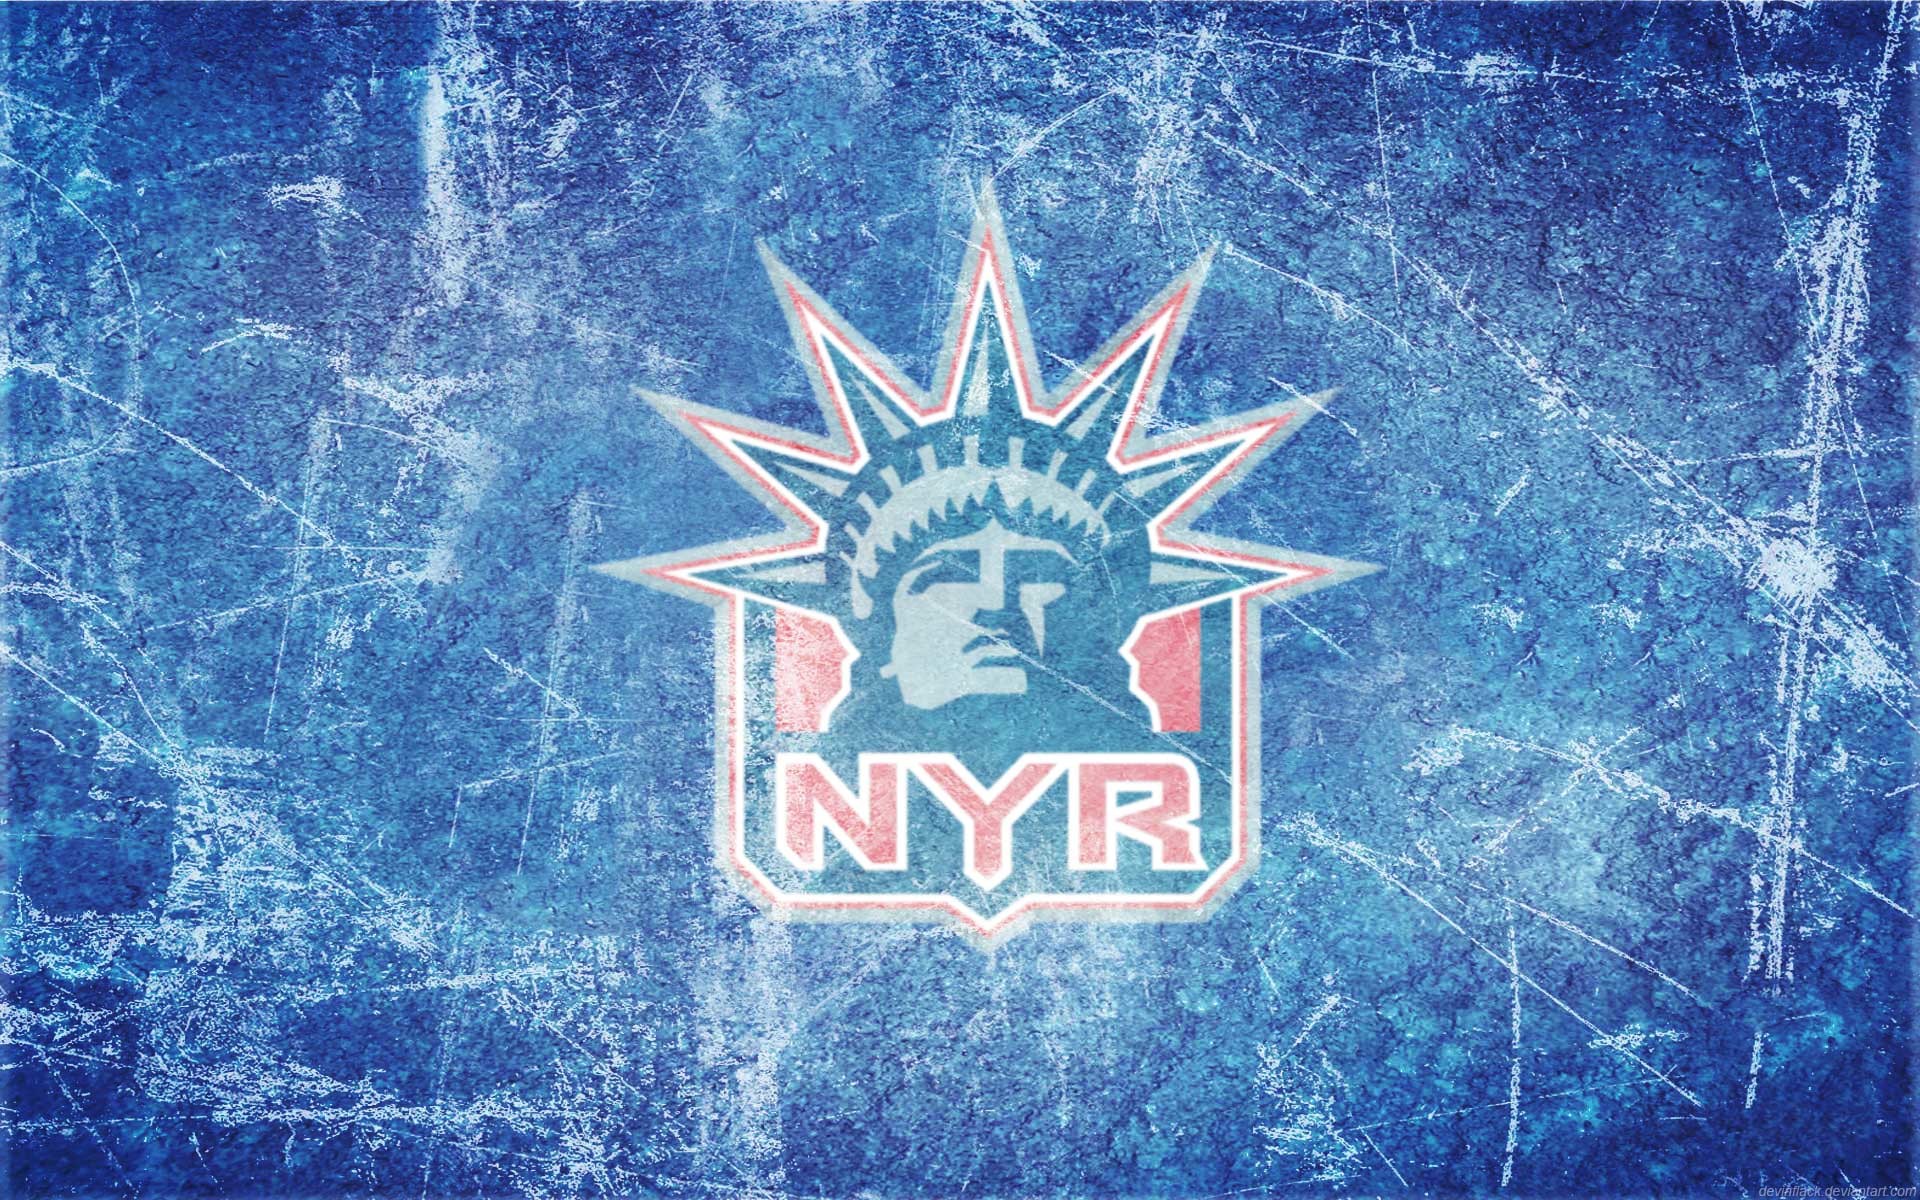 30 New York Rangers HD Wallpapers and Backgrounds